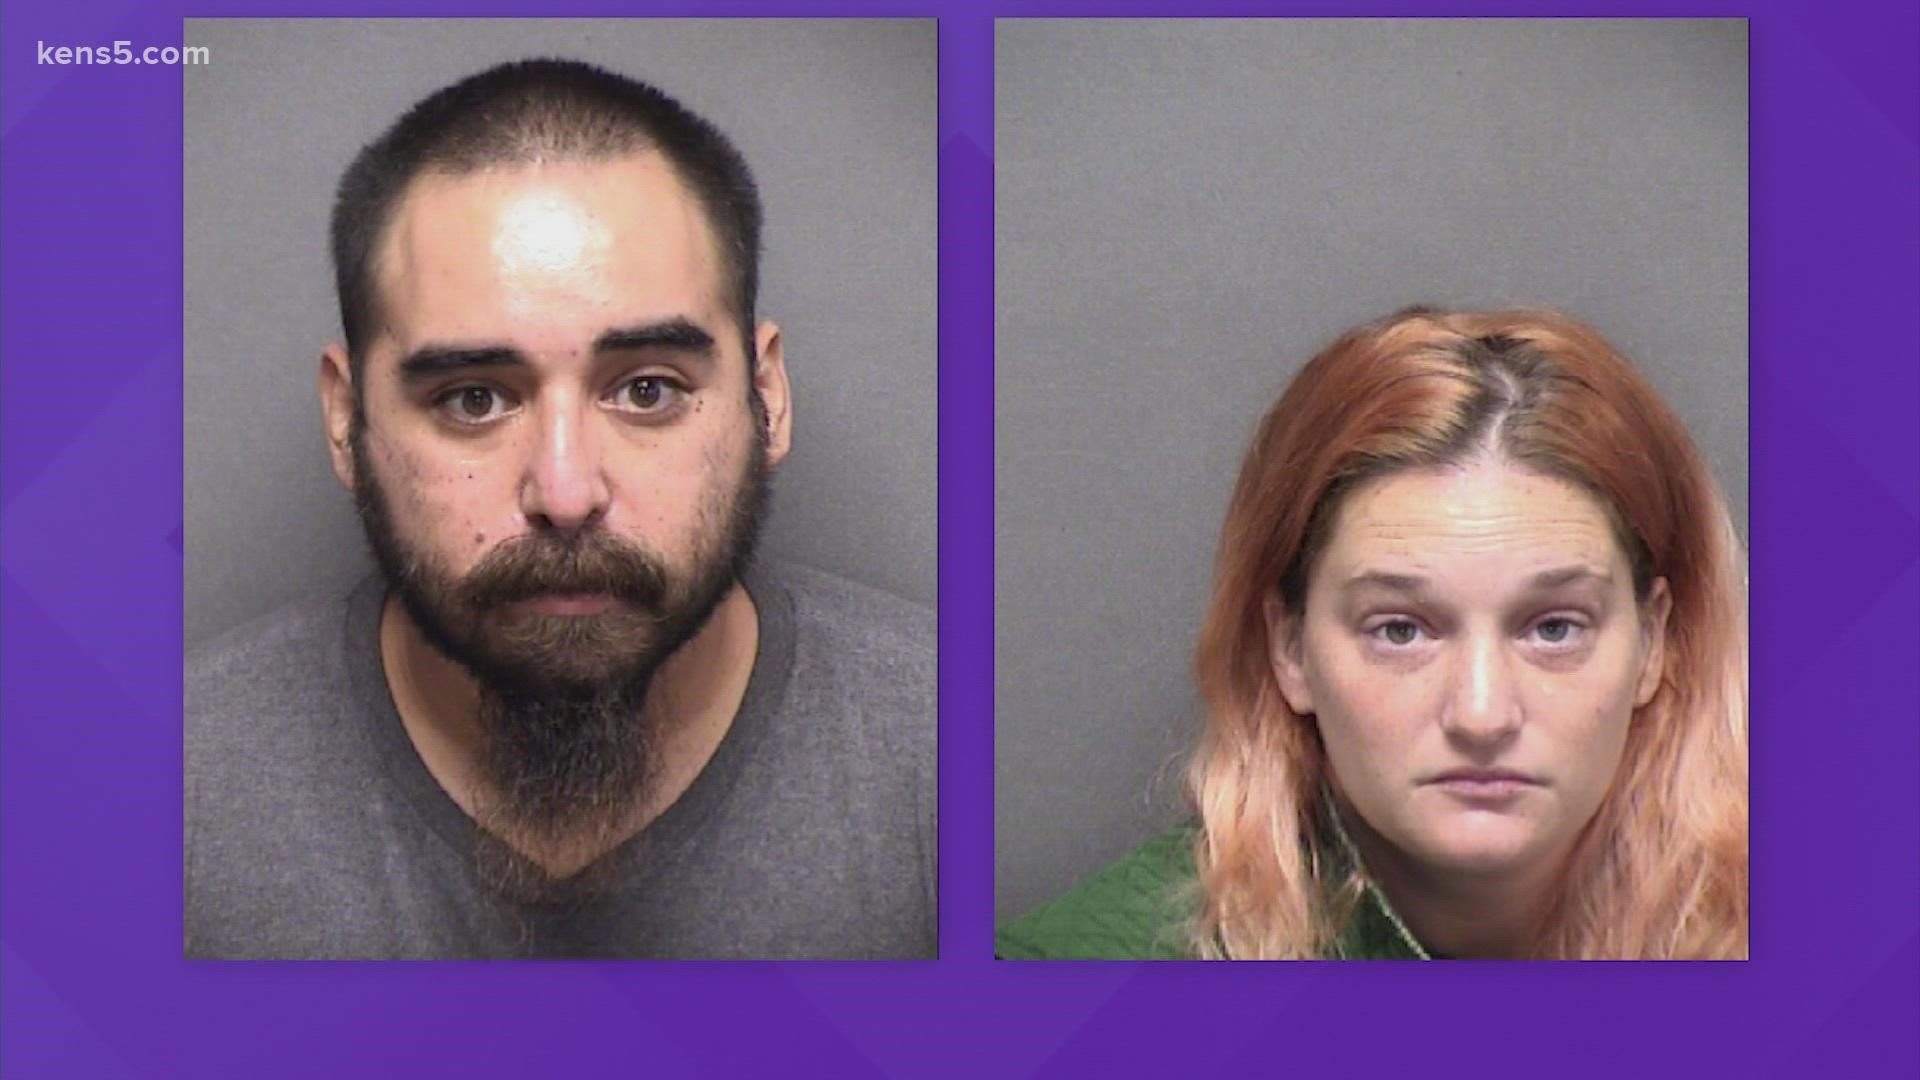 Couple facing several child sex charges, investigators fear there may be more victims kens5 pic picture